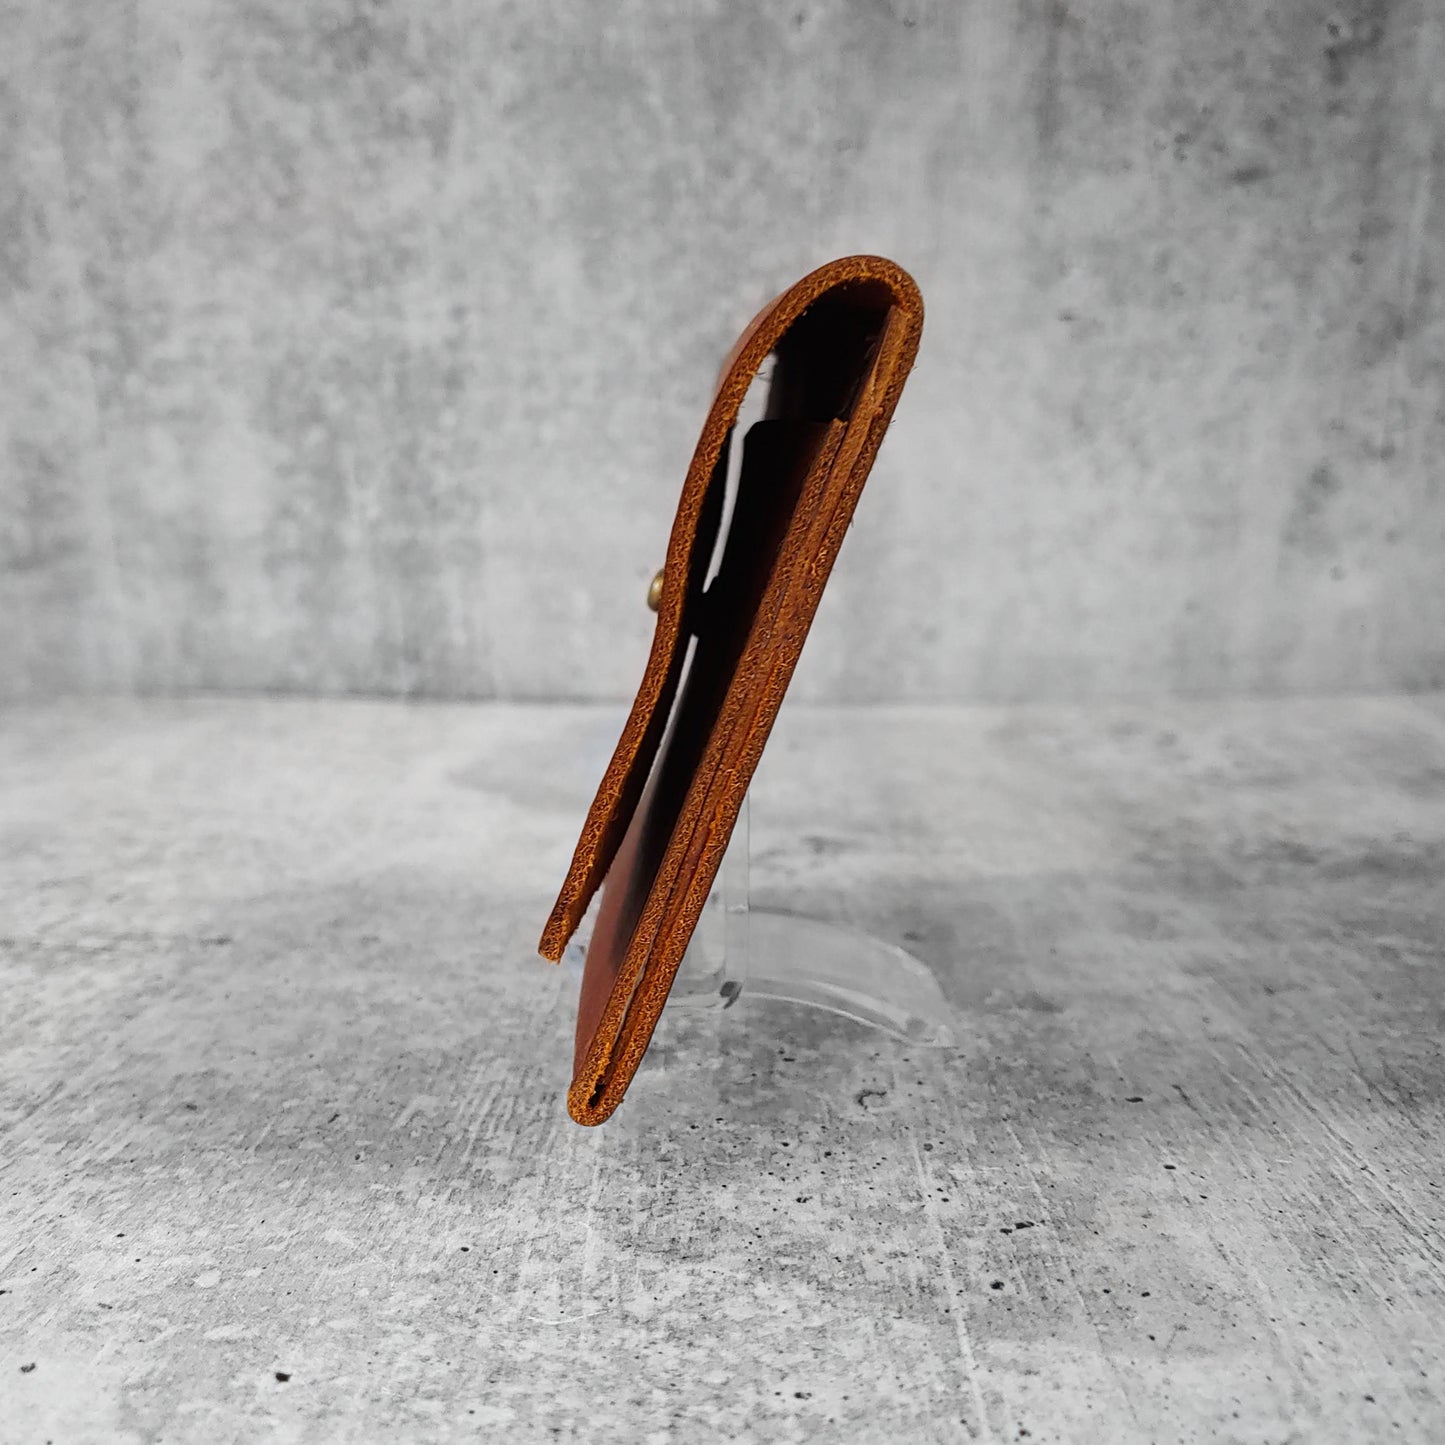 Side view of "wide leather wallet with asymmetric flap" in kodiak brown against a concrete background.